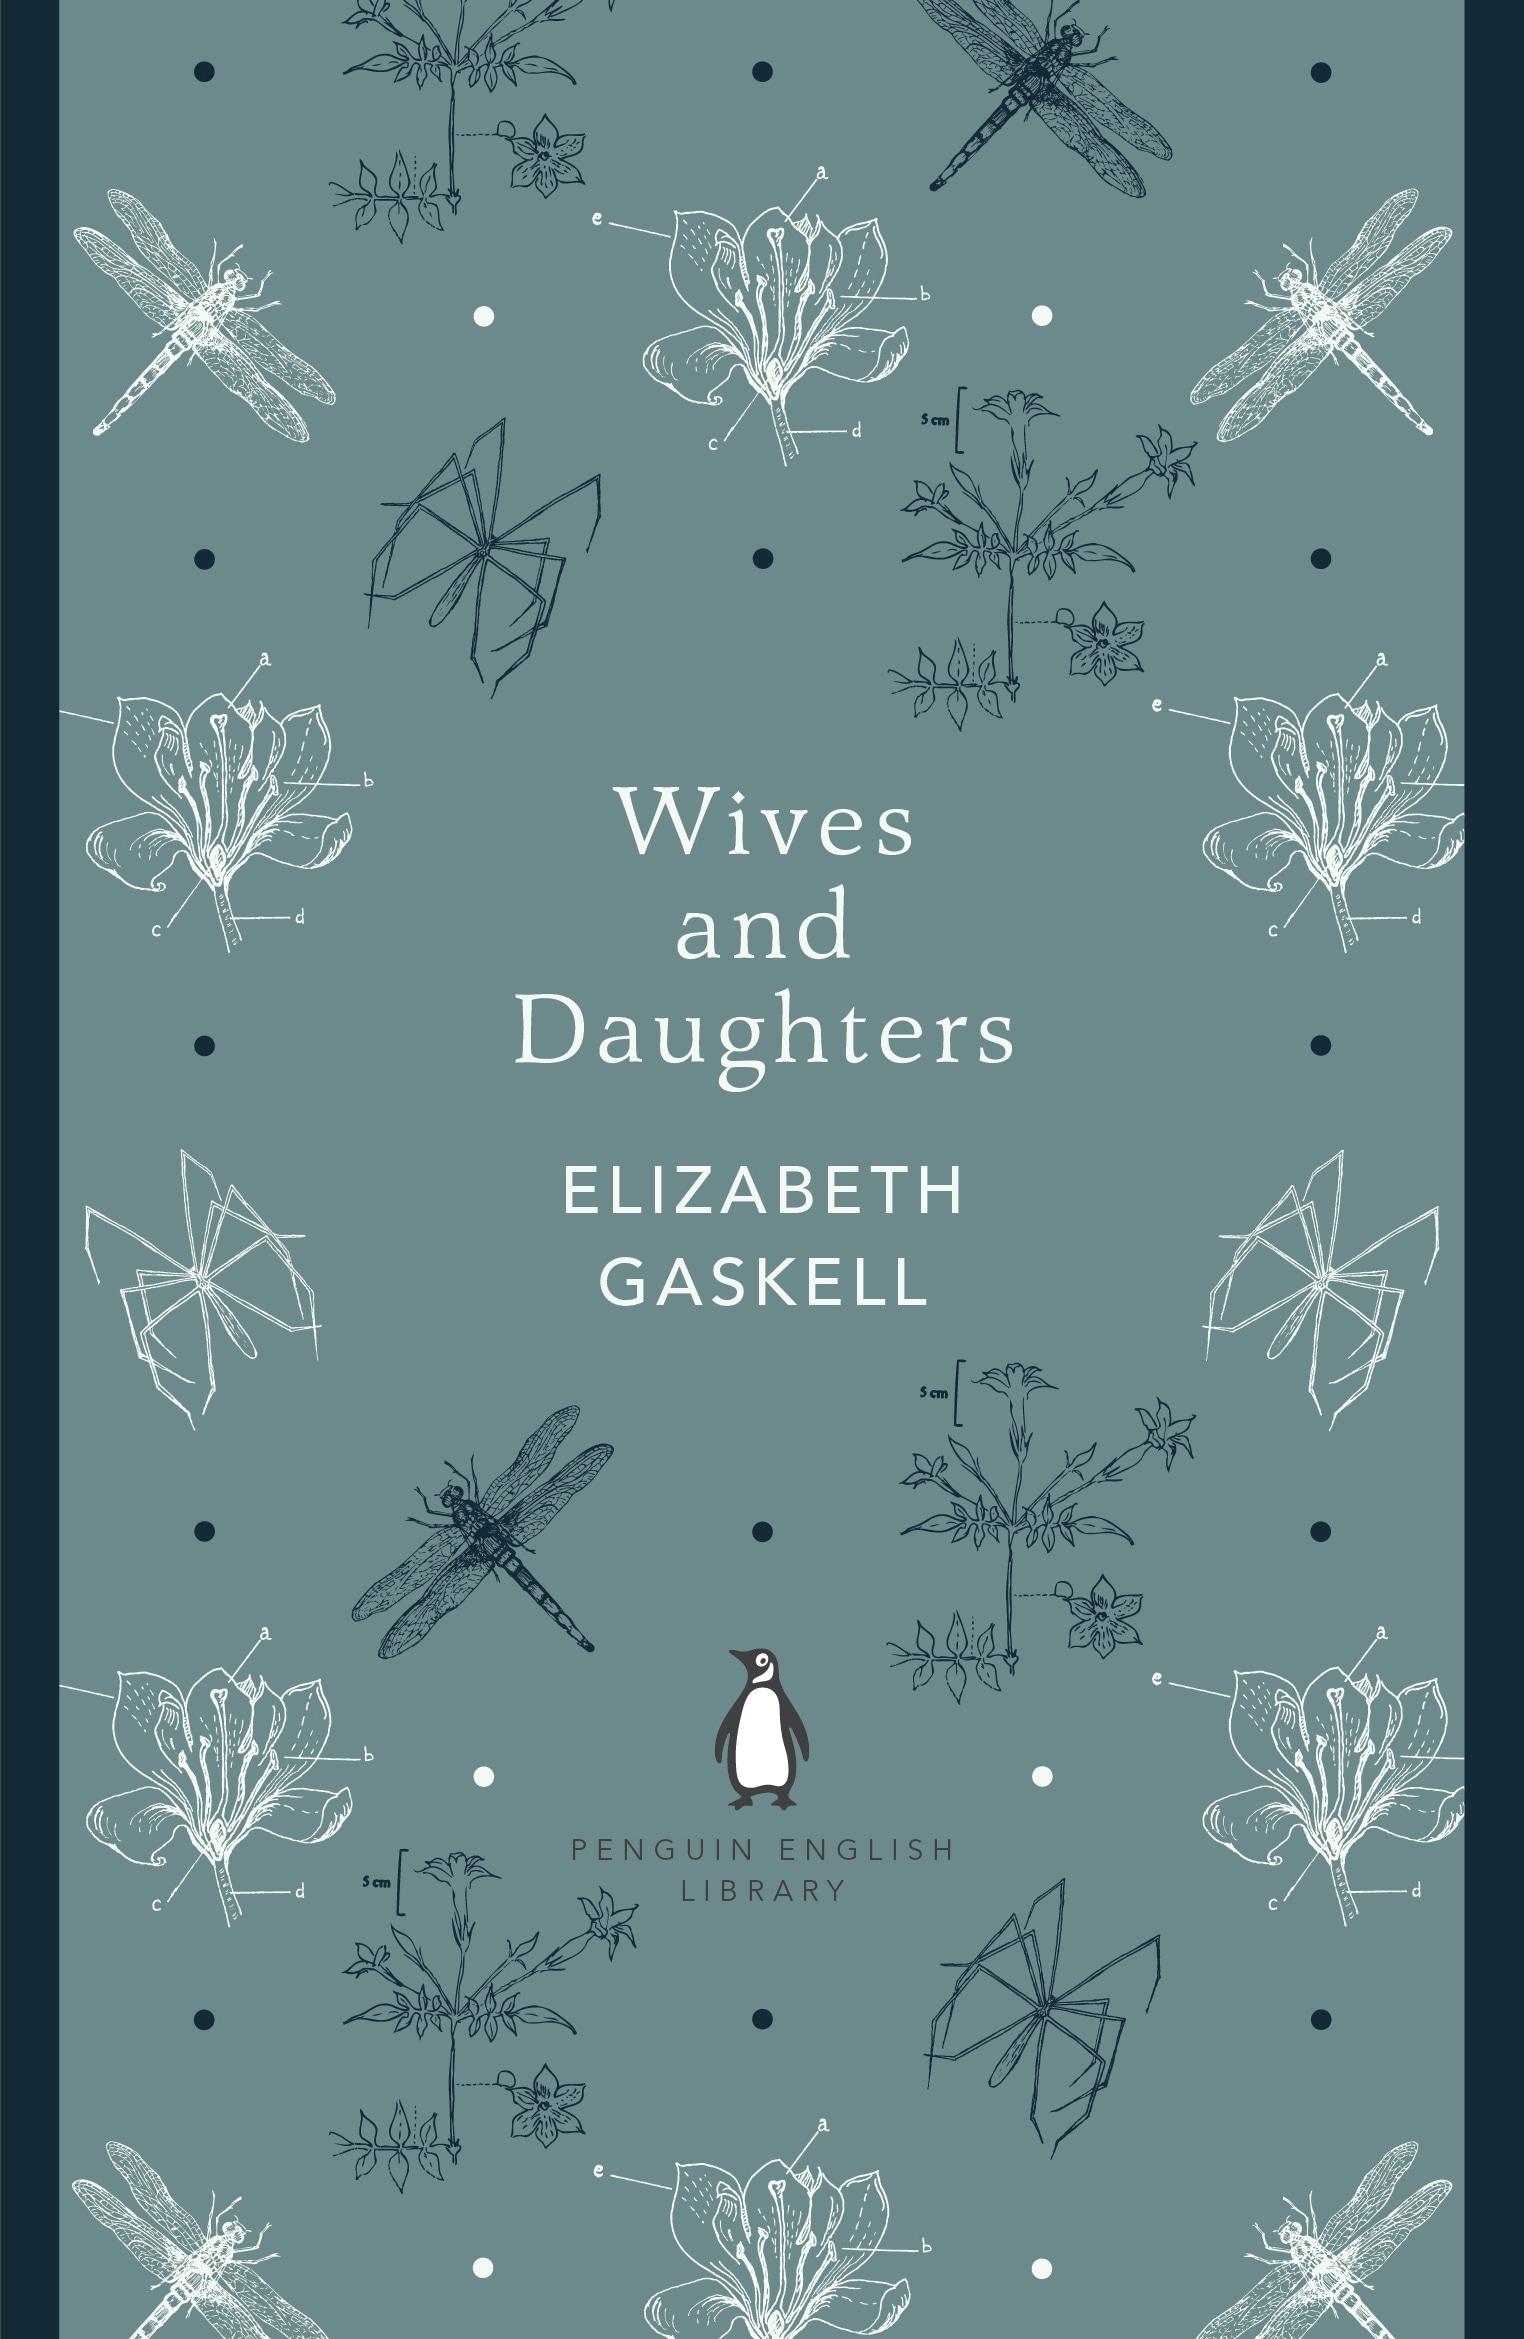 Book “Wives and Daughters” by Elizabeth Gaskell — November 29, 2012